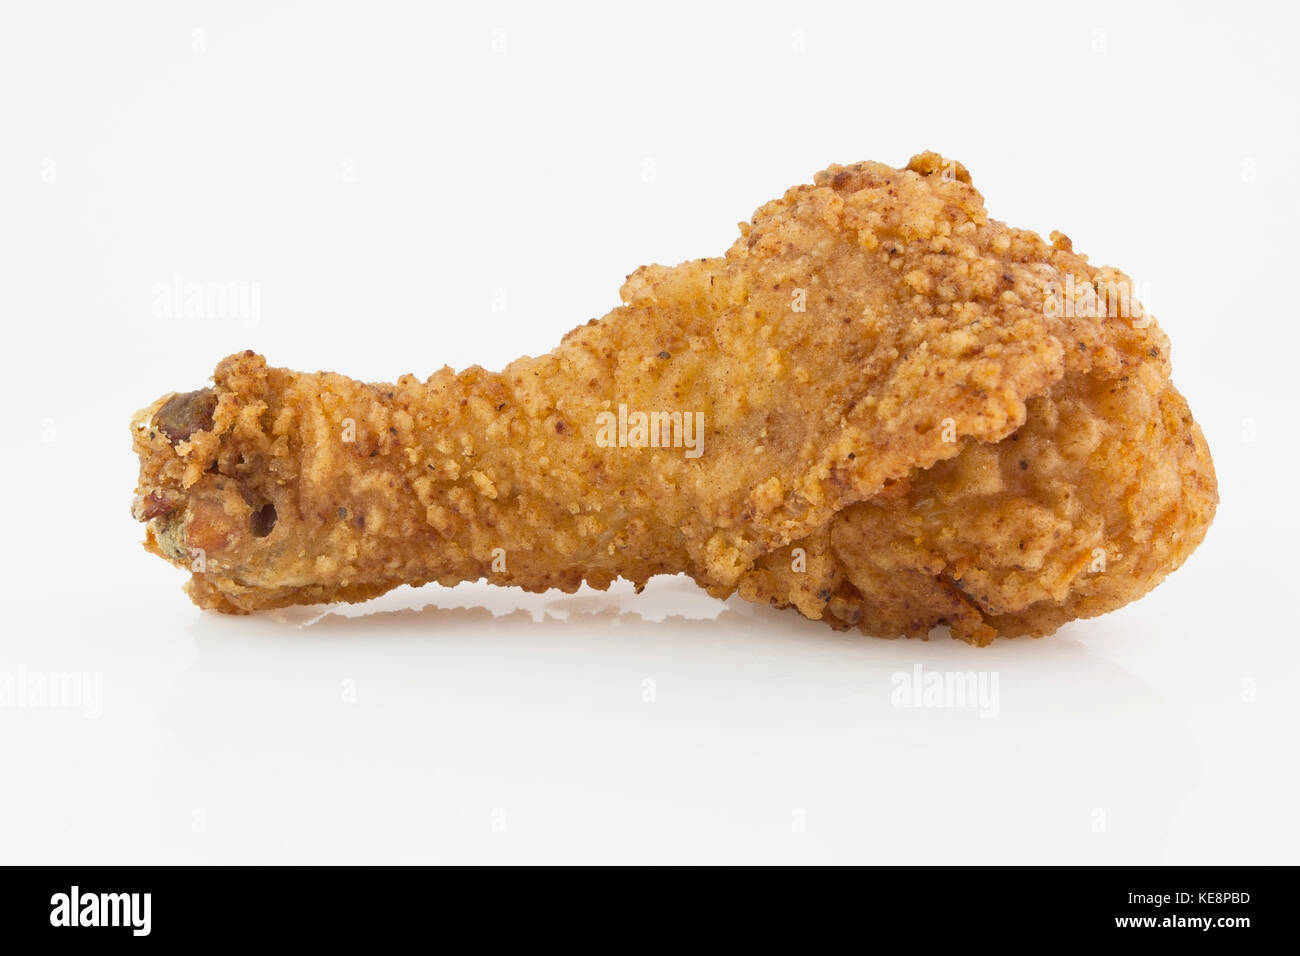 Homemade fried chicken drumstick on white background. Horizontal. Stock Photo